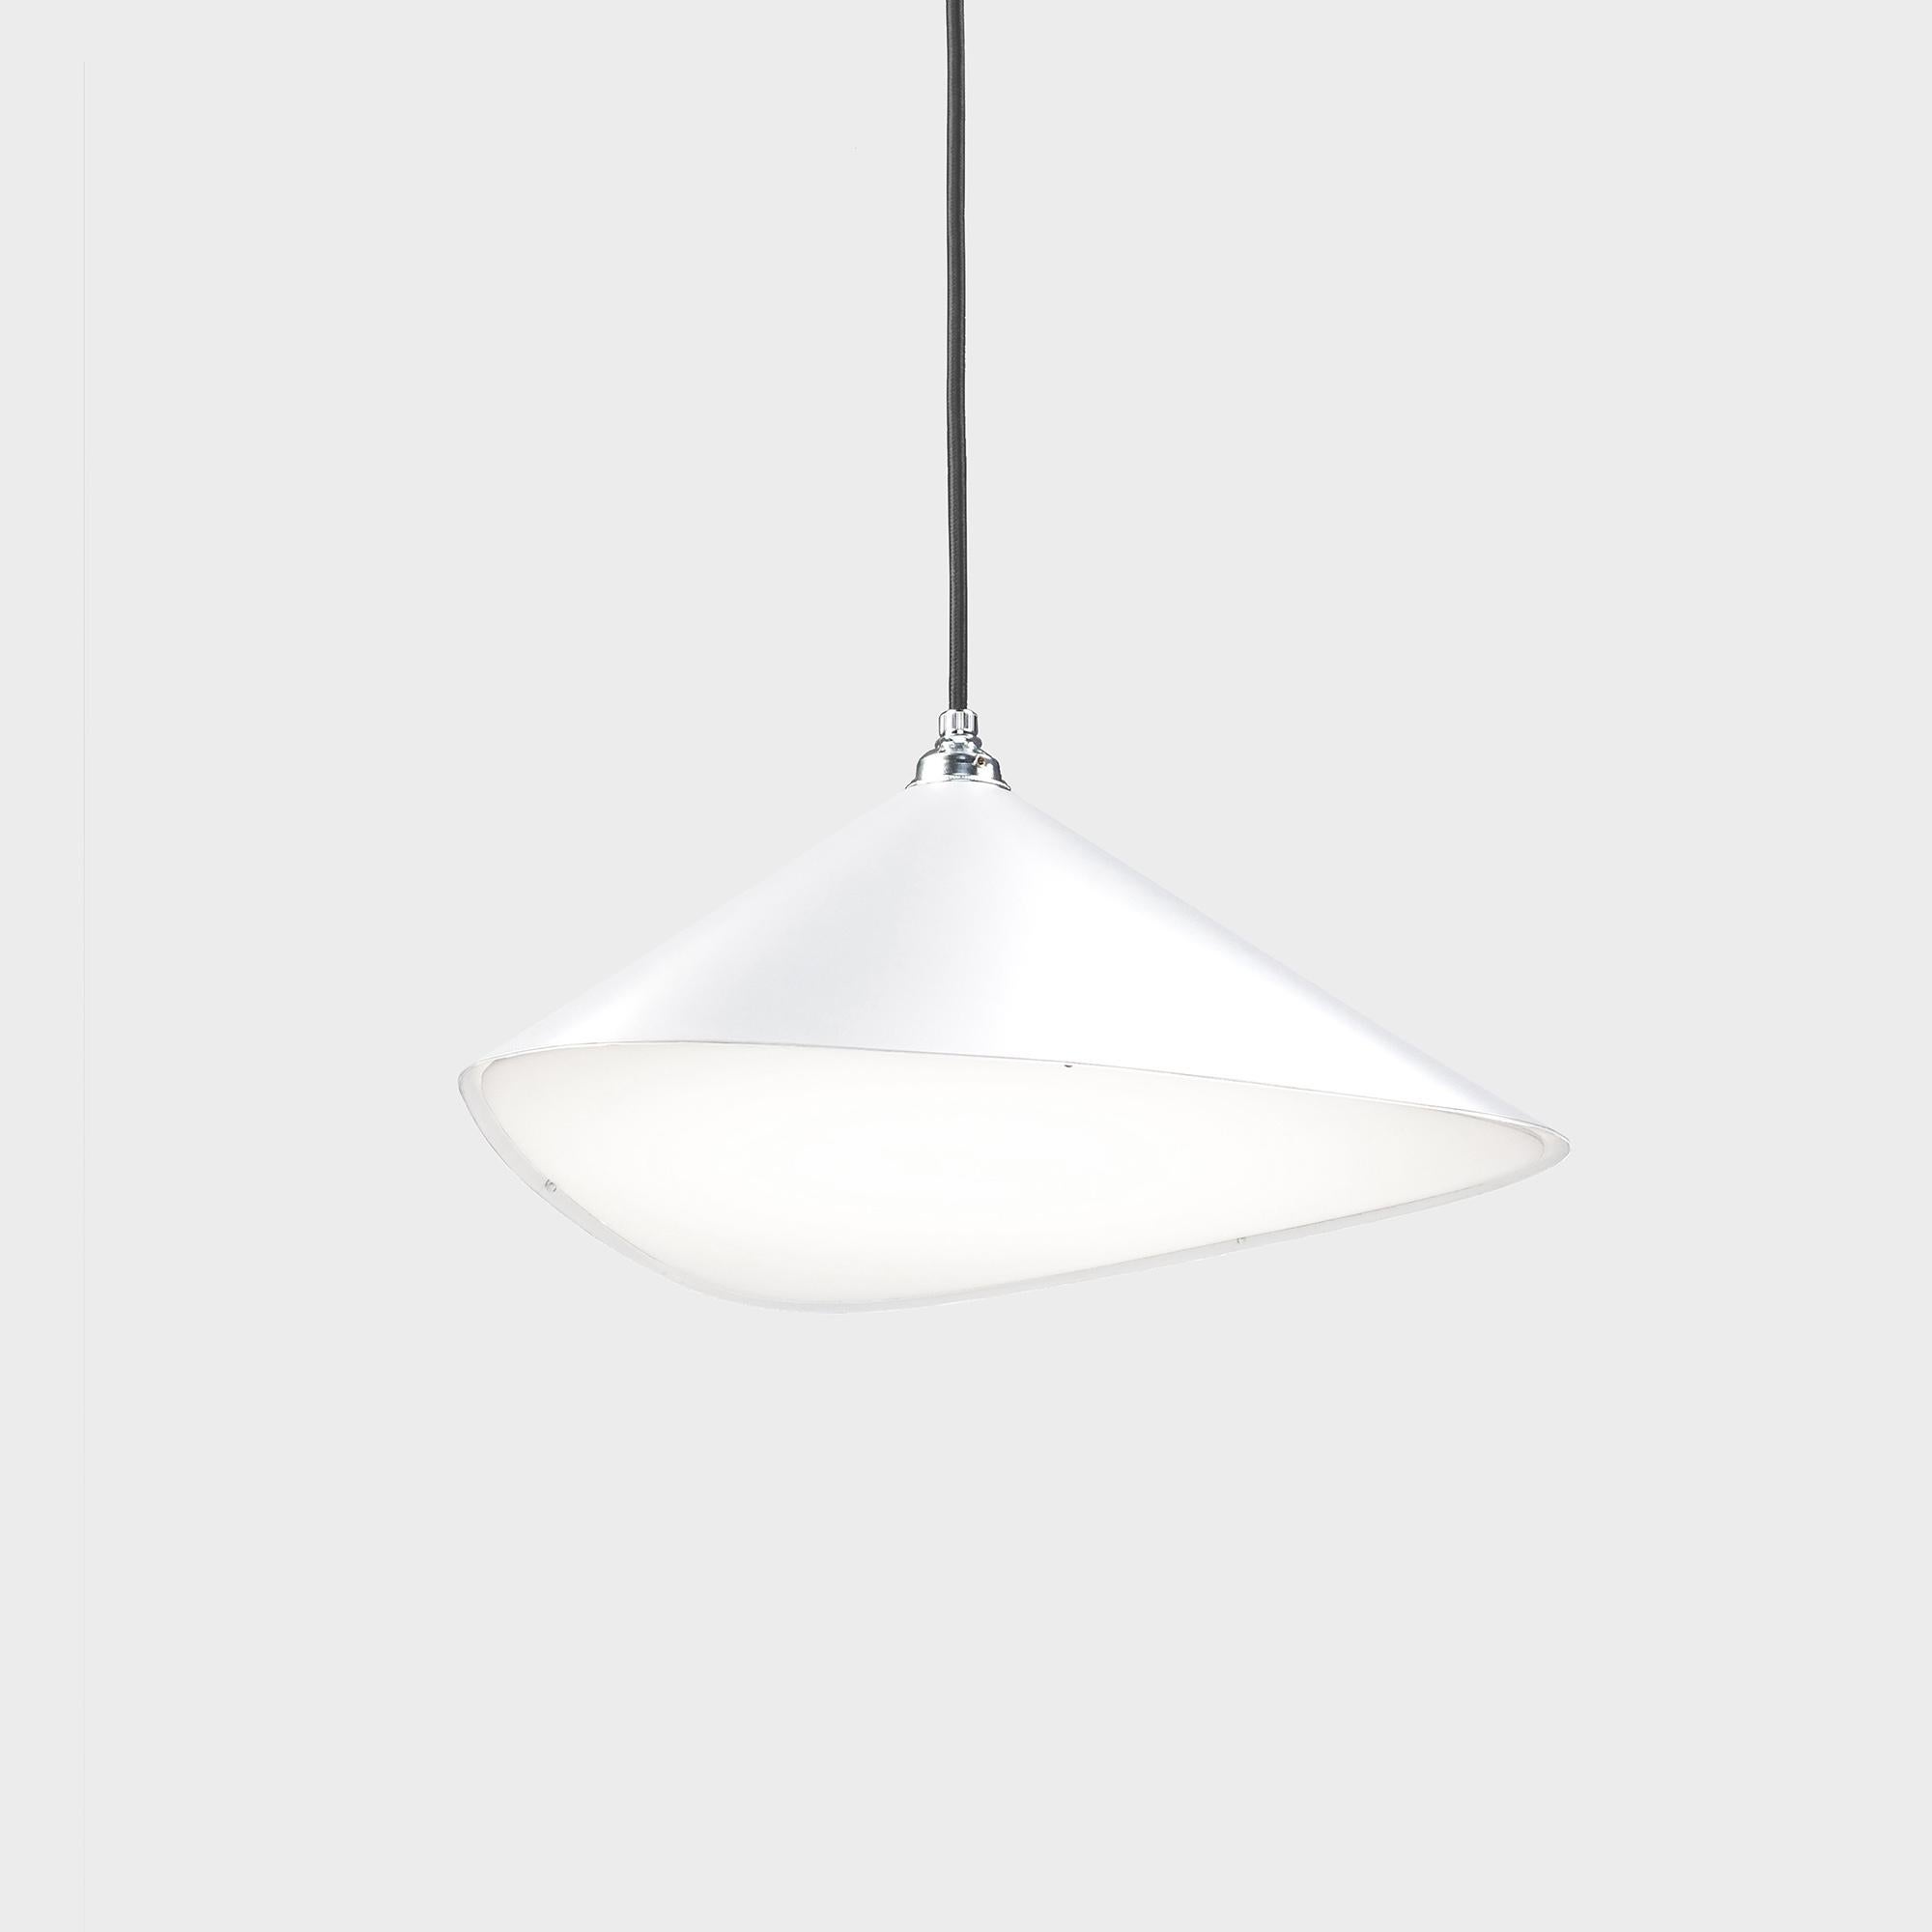 Daniel Becker 'Emily II' pendant lamp in matte white for Moss Objects. Designed by Berlin luminary Daniel Becker and handmade to order using mid-century manufacturing techniques. Executed in high-quality sheet metal with up to ten layers glossy or